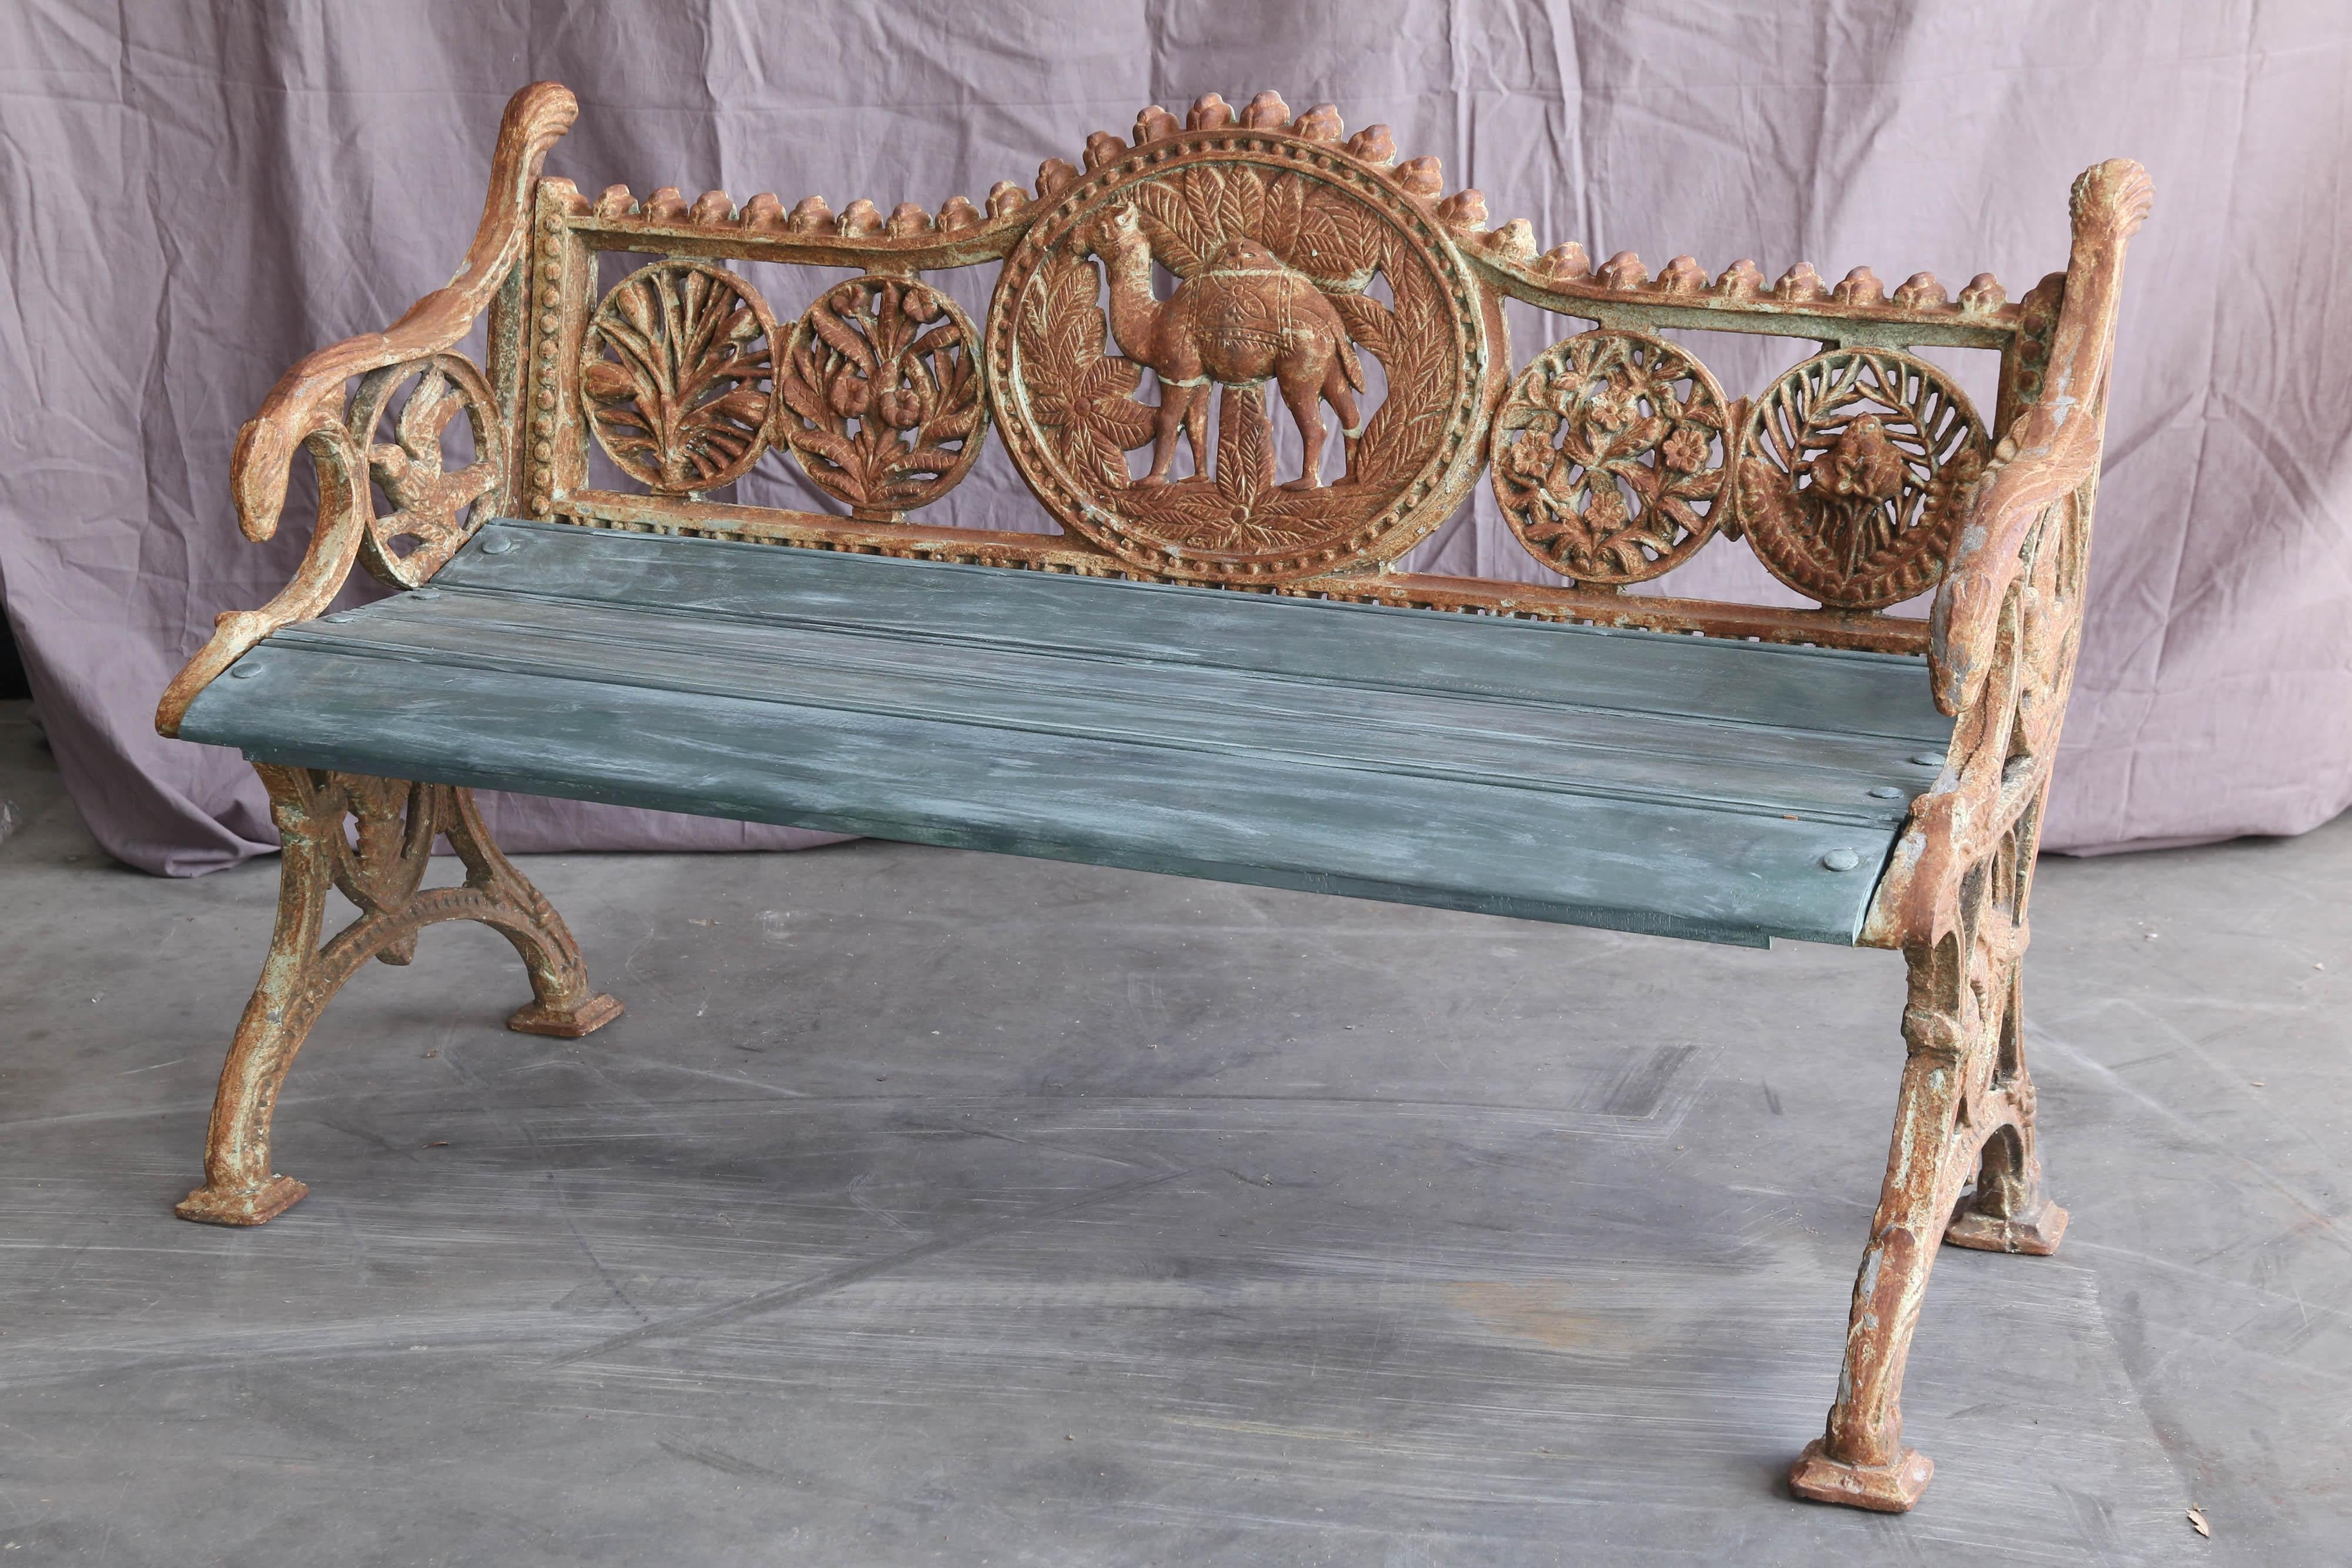 Benches like these were cast in old foundries in Calcutta and were extensively used in colonial rail road stations. The wooden seats would be replaced when the seats were worn out. This one has a camel emblem indicating that it comes from a railroad